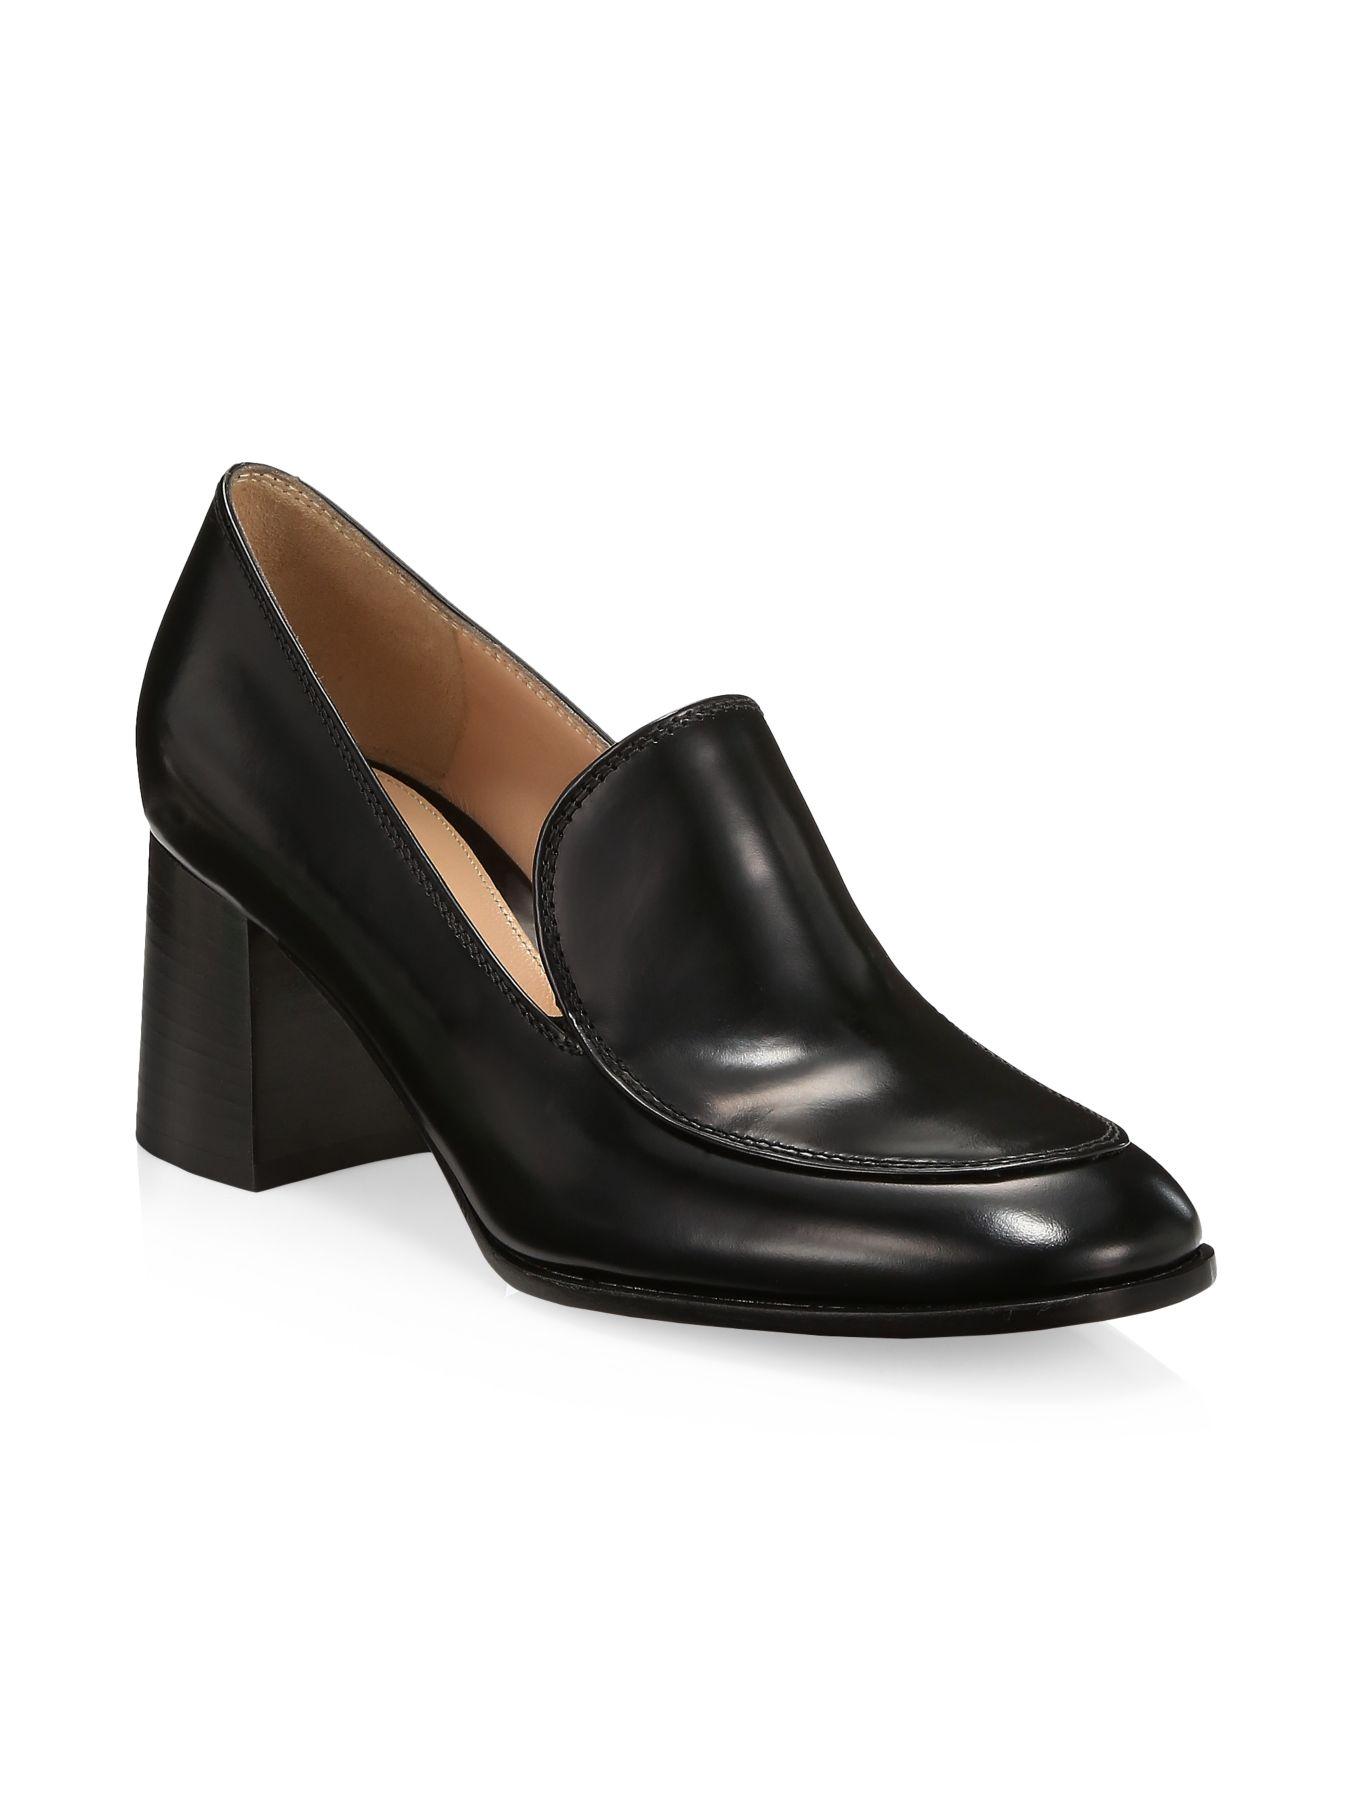 Gianvito Rossi Block-heel Leather Loafers in Black - Lyst